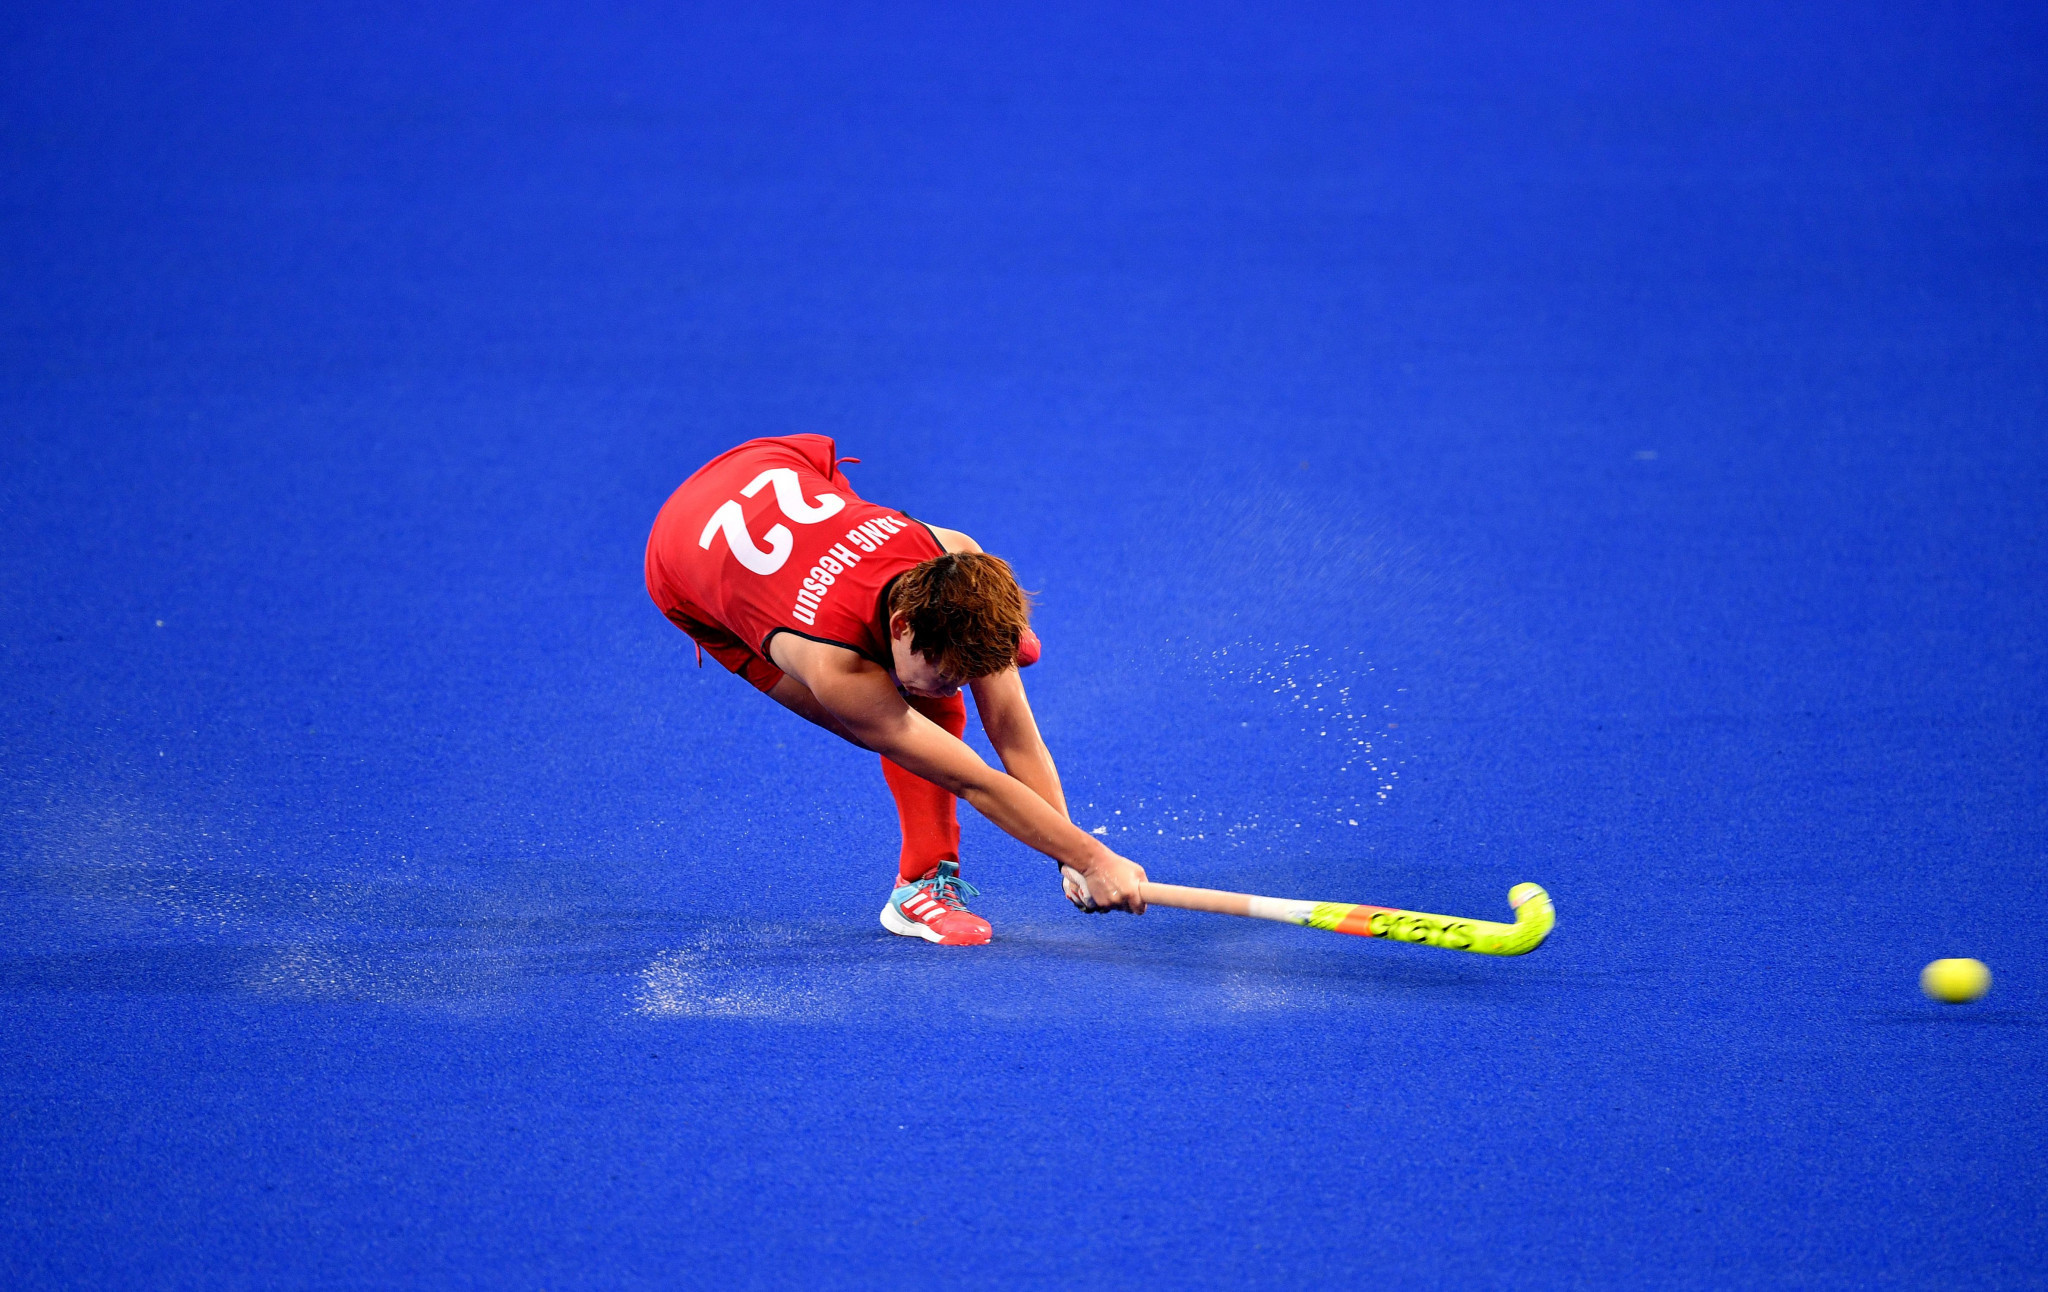 South Korea are the second-highest ranked team at the FIH Series Finals event in Ireland ©Getty Images